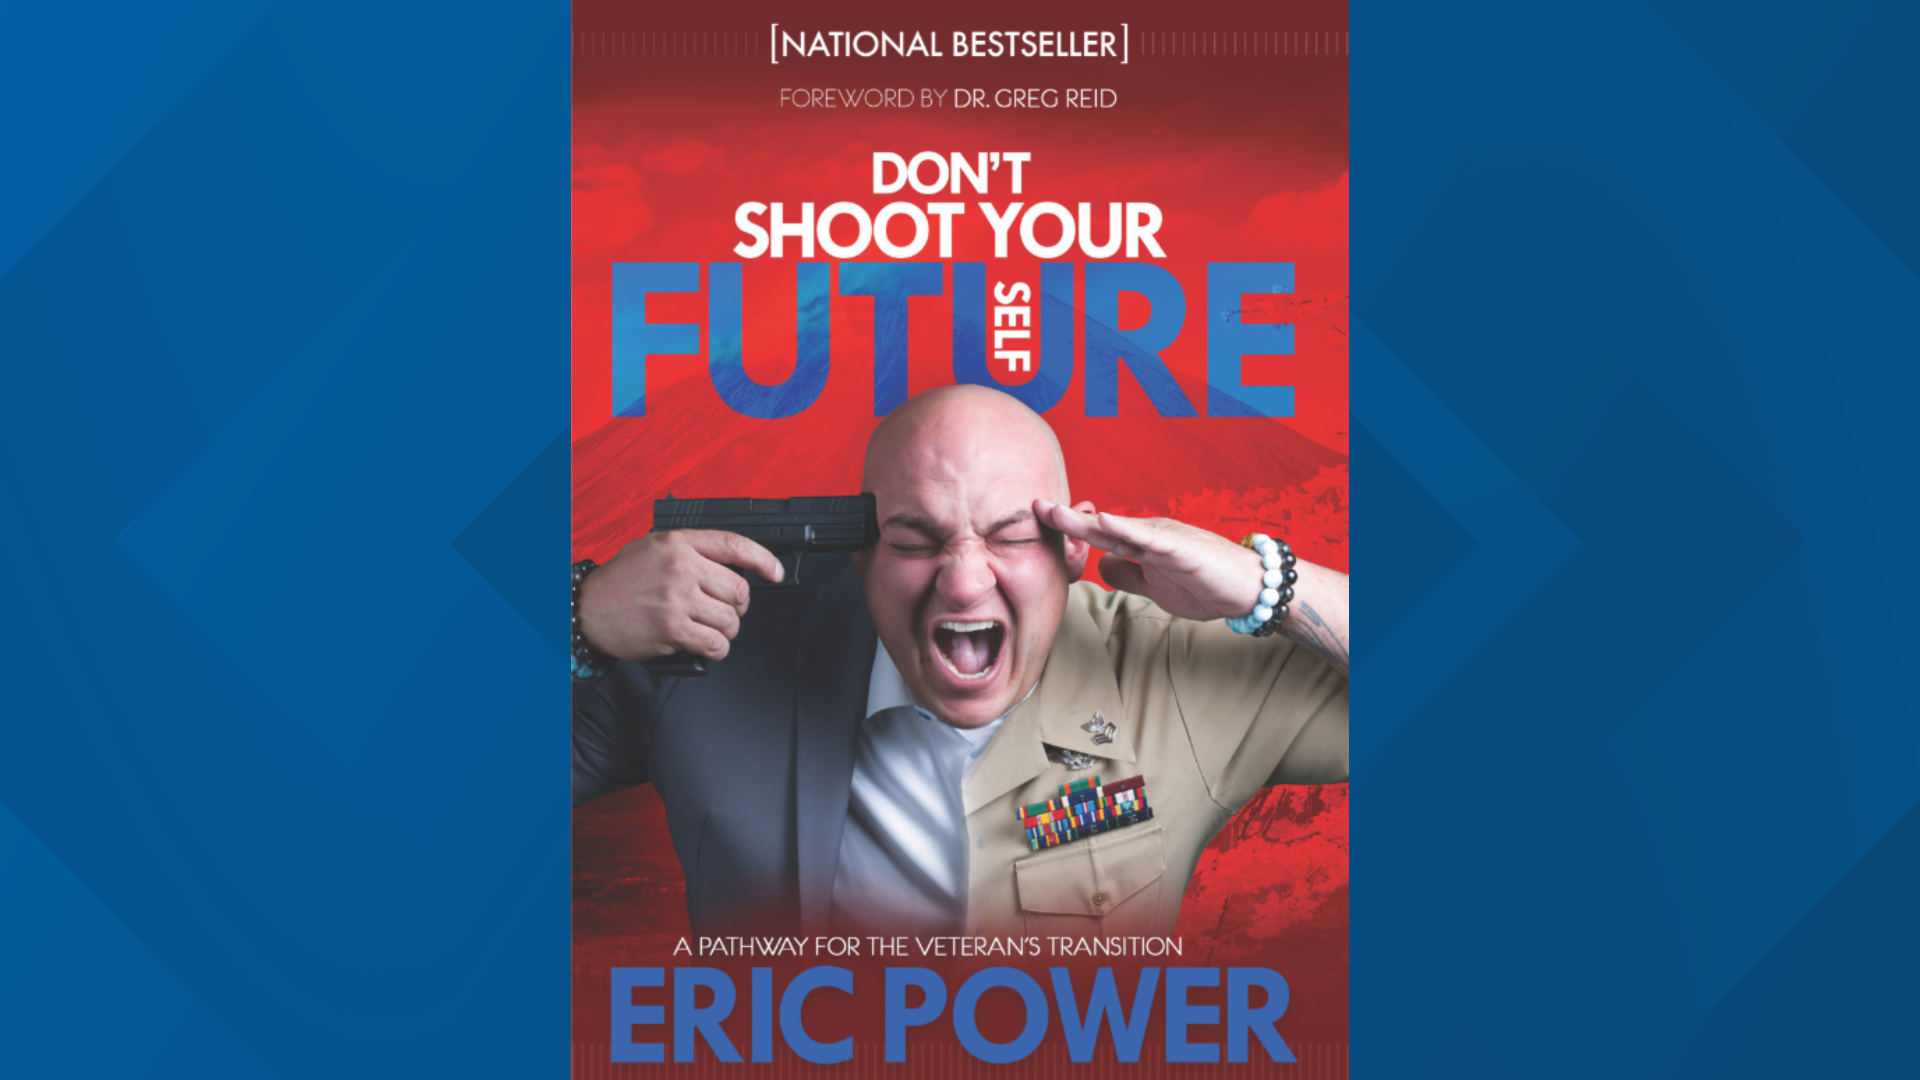 Eric Power, an active combat veteran, said through his newly-released book, his hope is to change the minds and lives of those who are forgotten about.